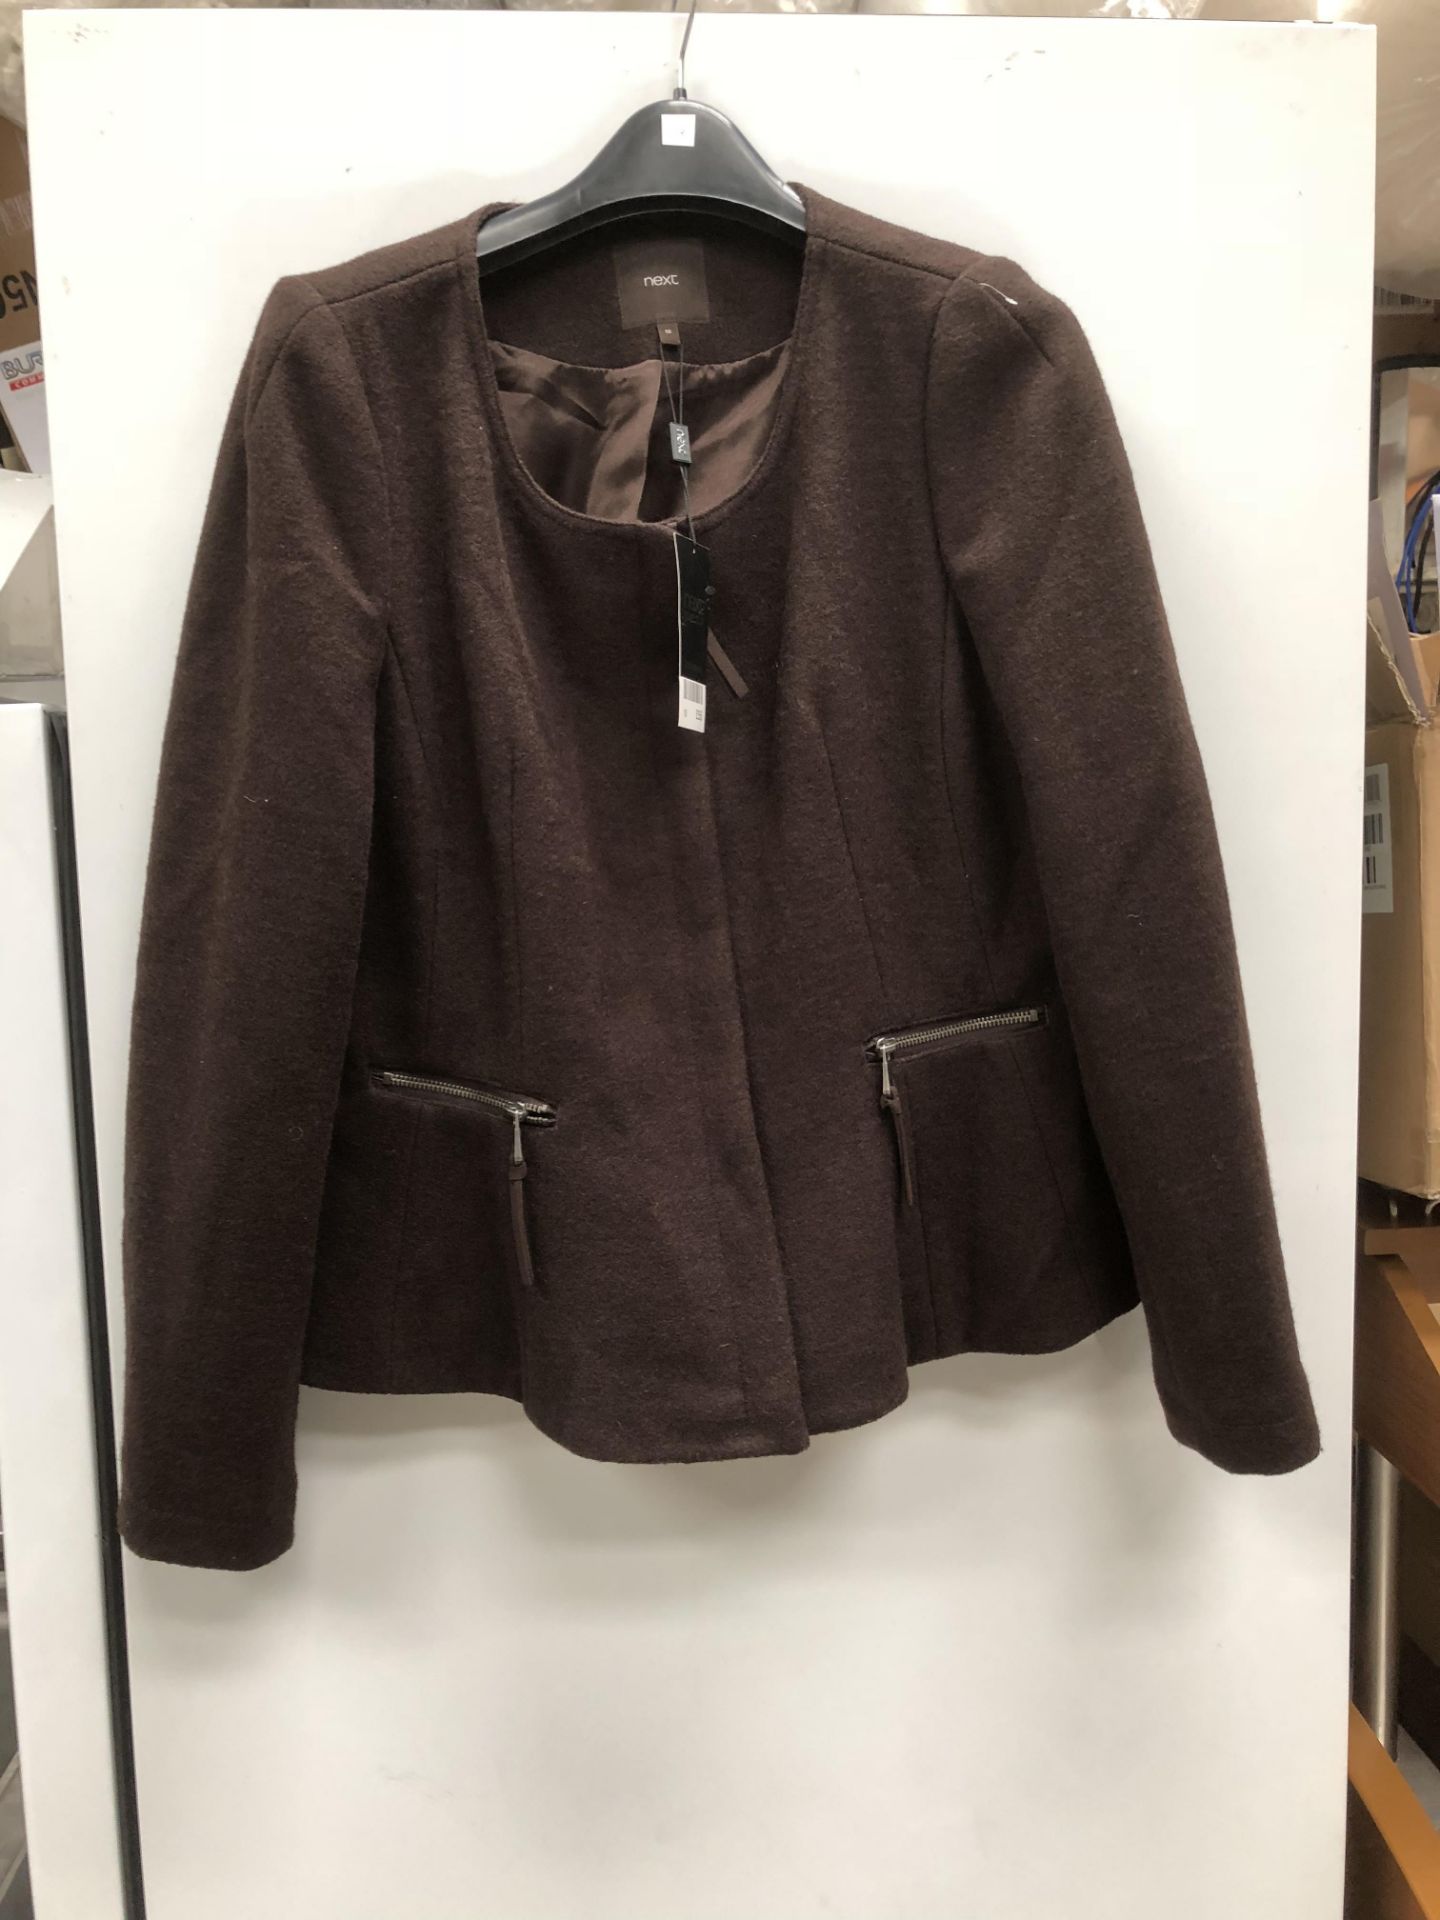 Next, Dark Brown Taylored Jacket, Size 18 New with Tags